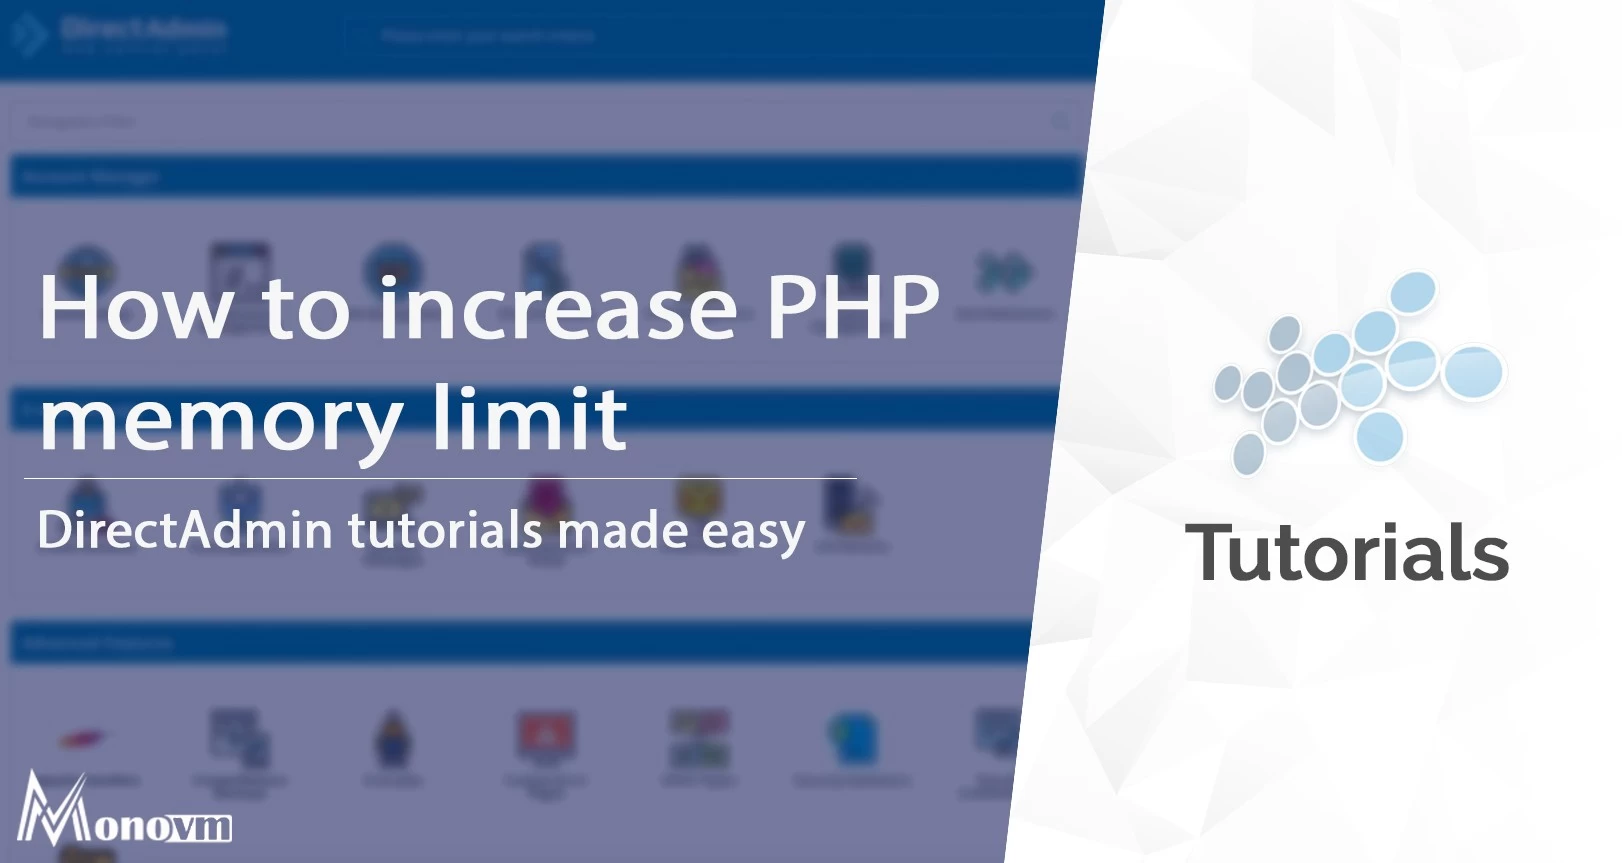 How to Increase PHP Memory Limit in DirectAdmin